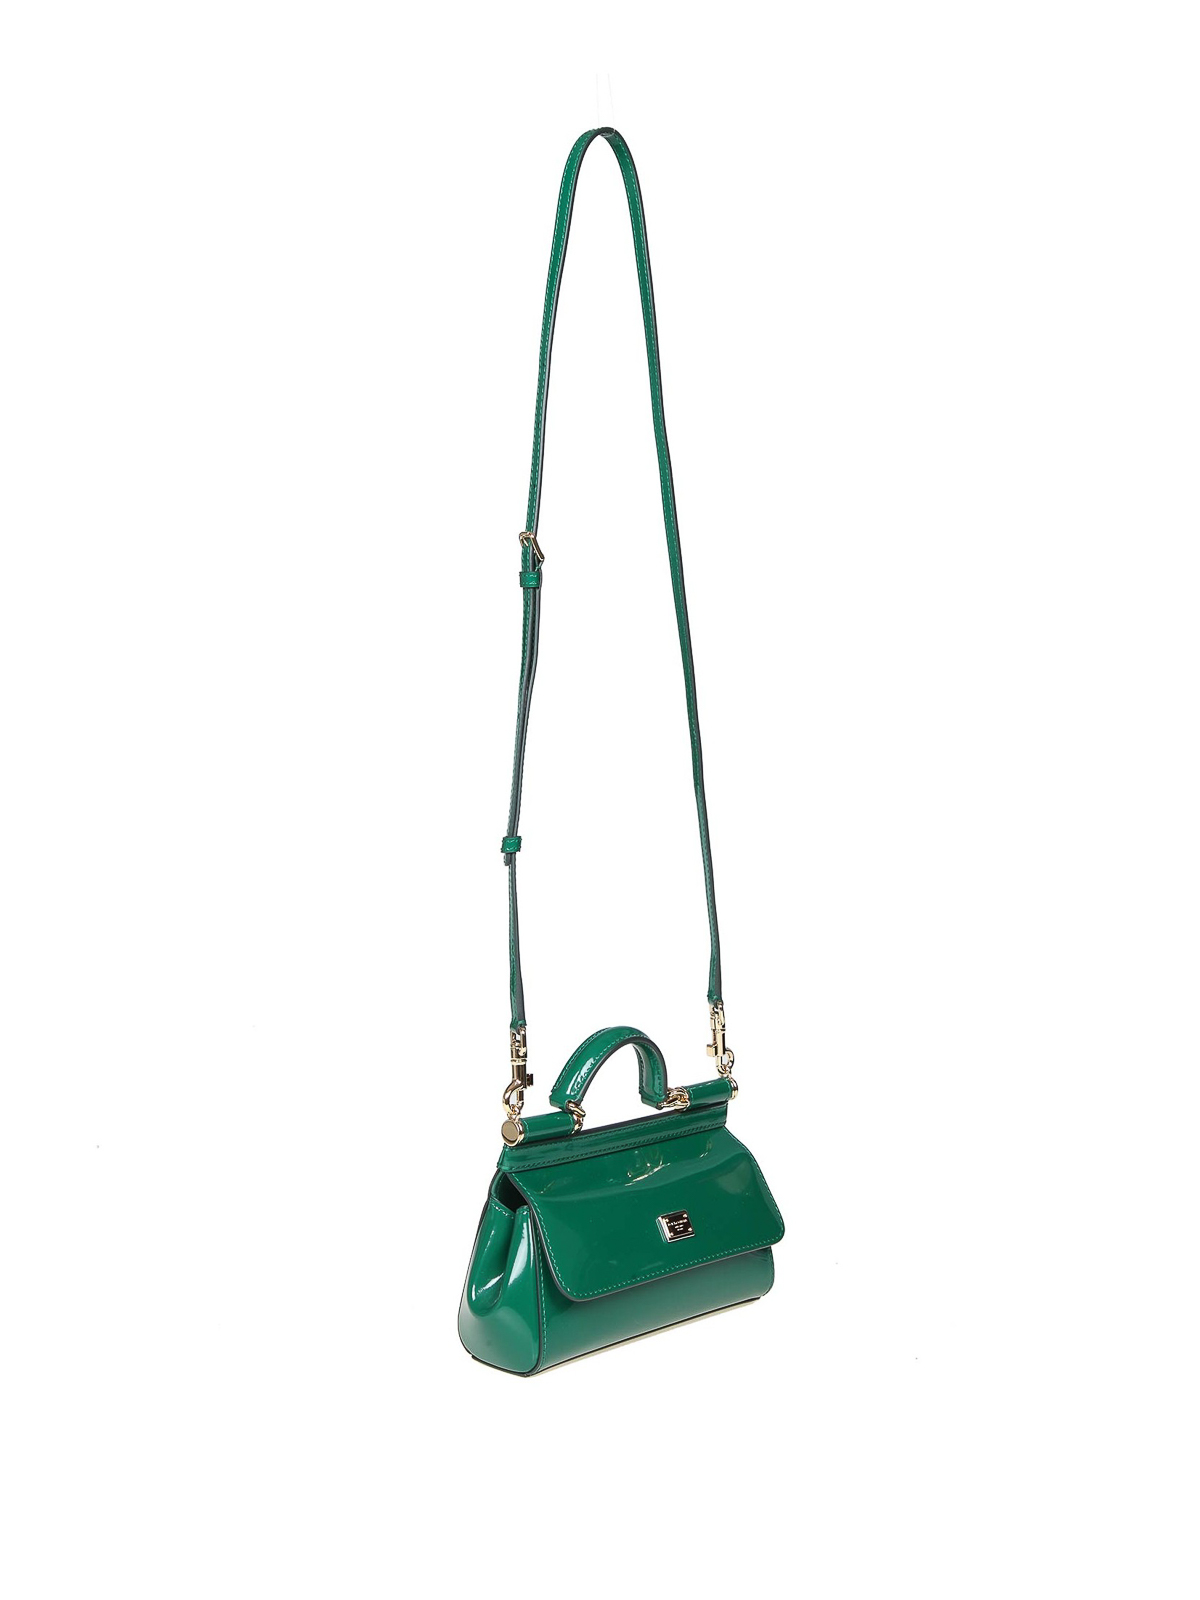 Totes bags Dolce & Gabbana - Small sicily bag in shiny calfskin